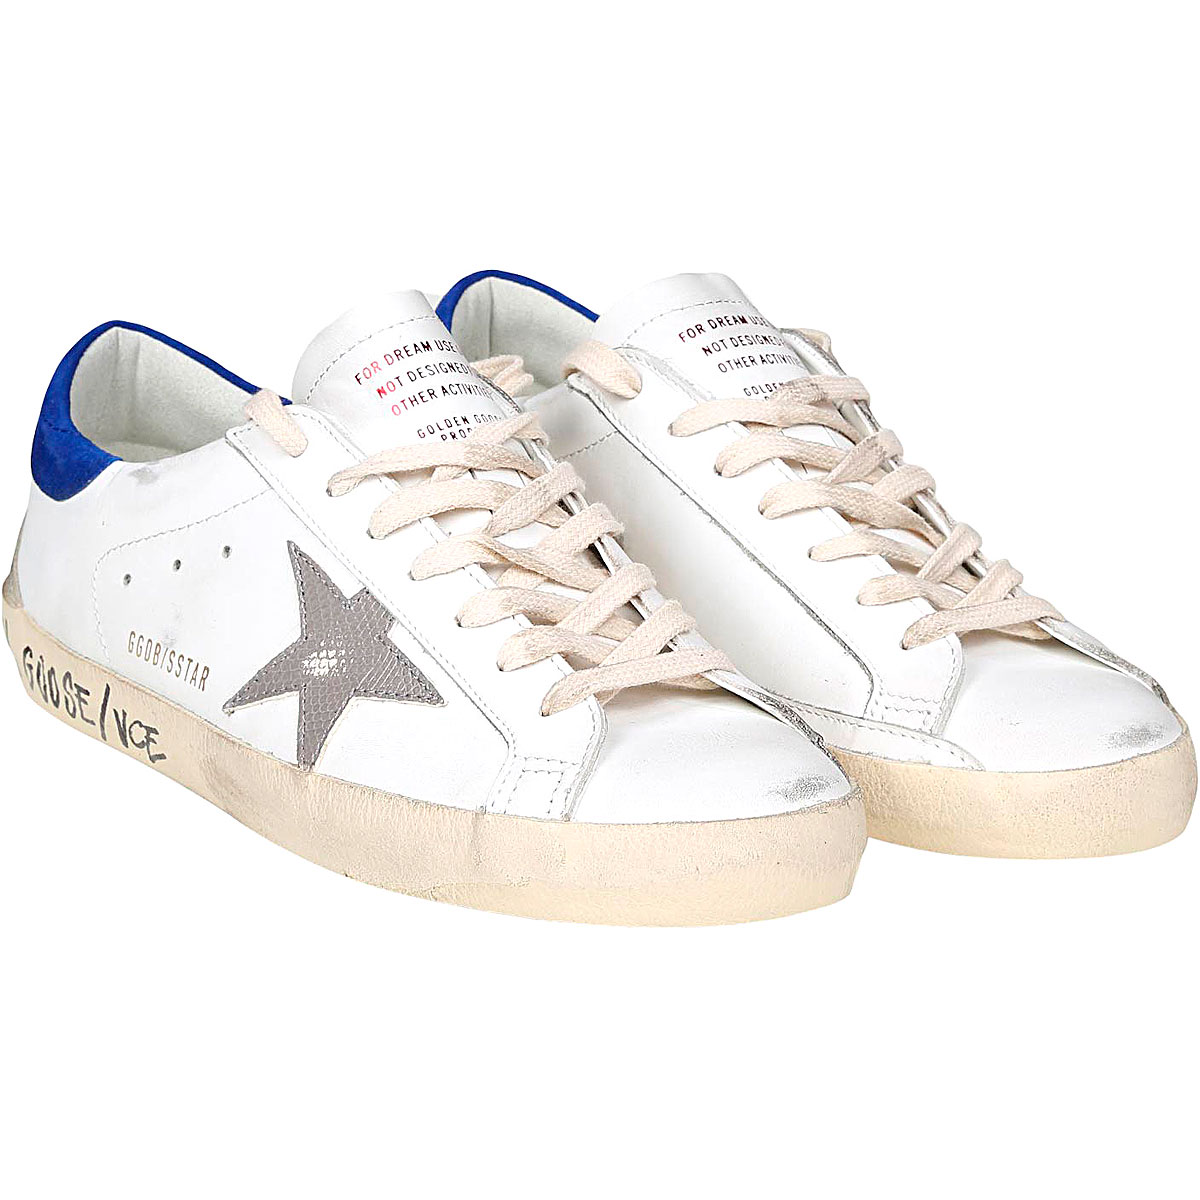 Mens Shoes Golden Goose, Style code: gmf00102-f004797-11554